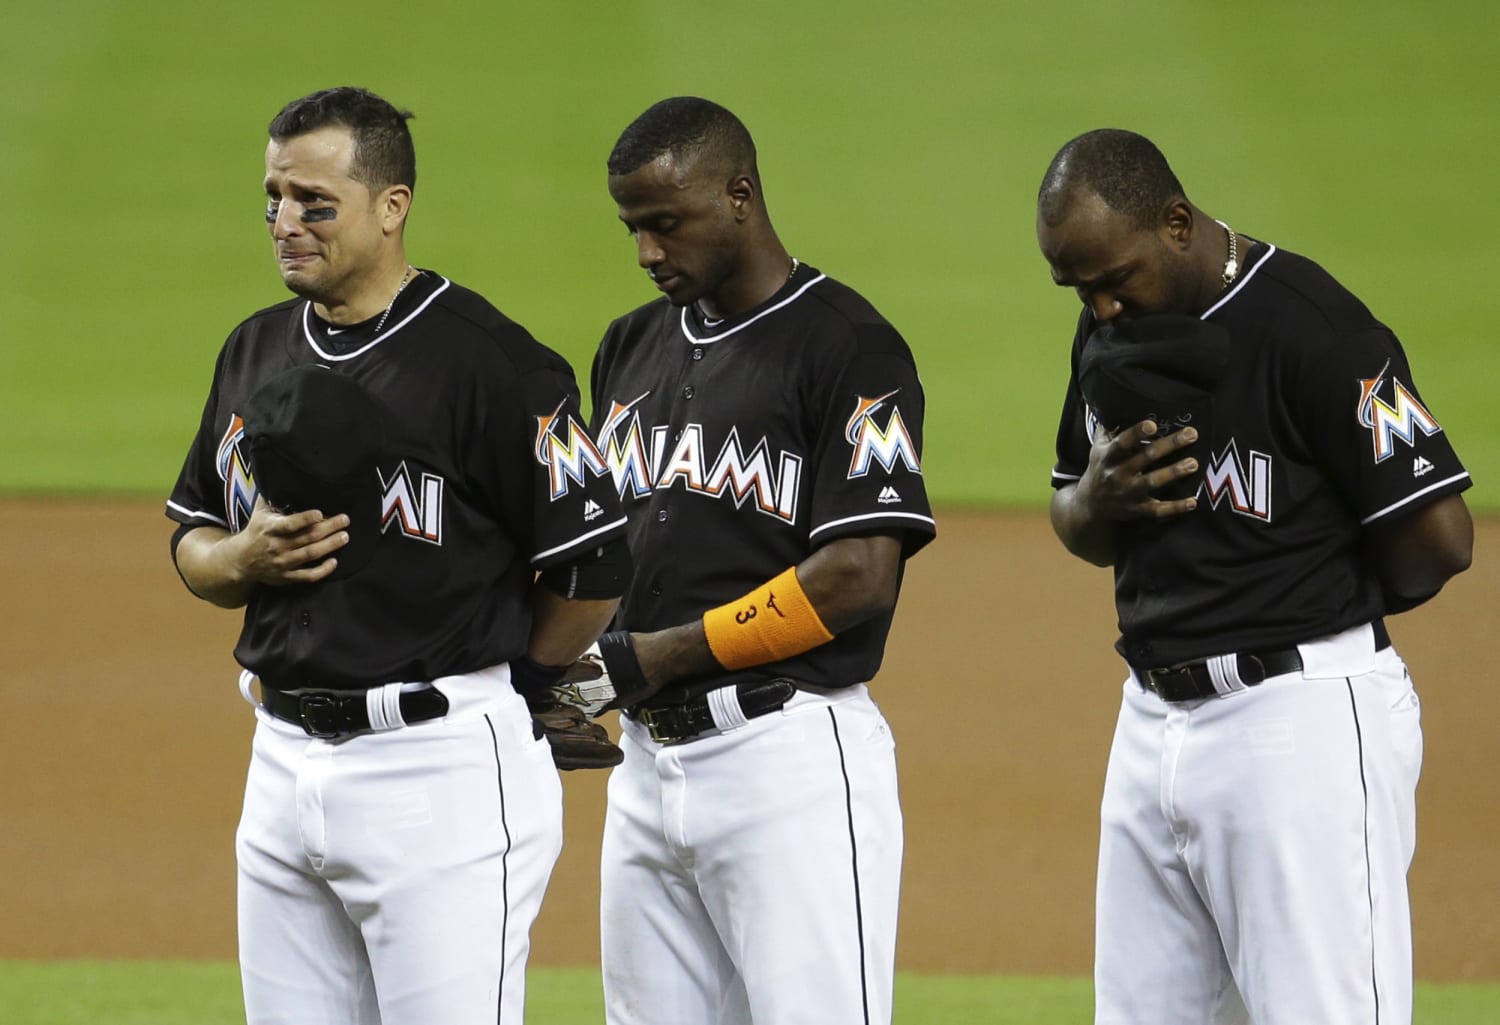 Jose Fernandez Remembered in Marlins' 1st Game Since Fatal Accident